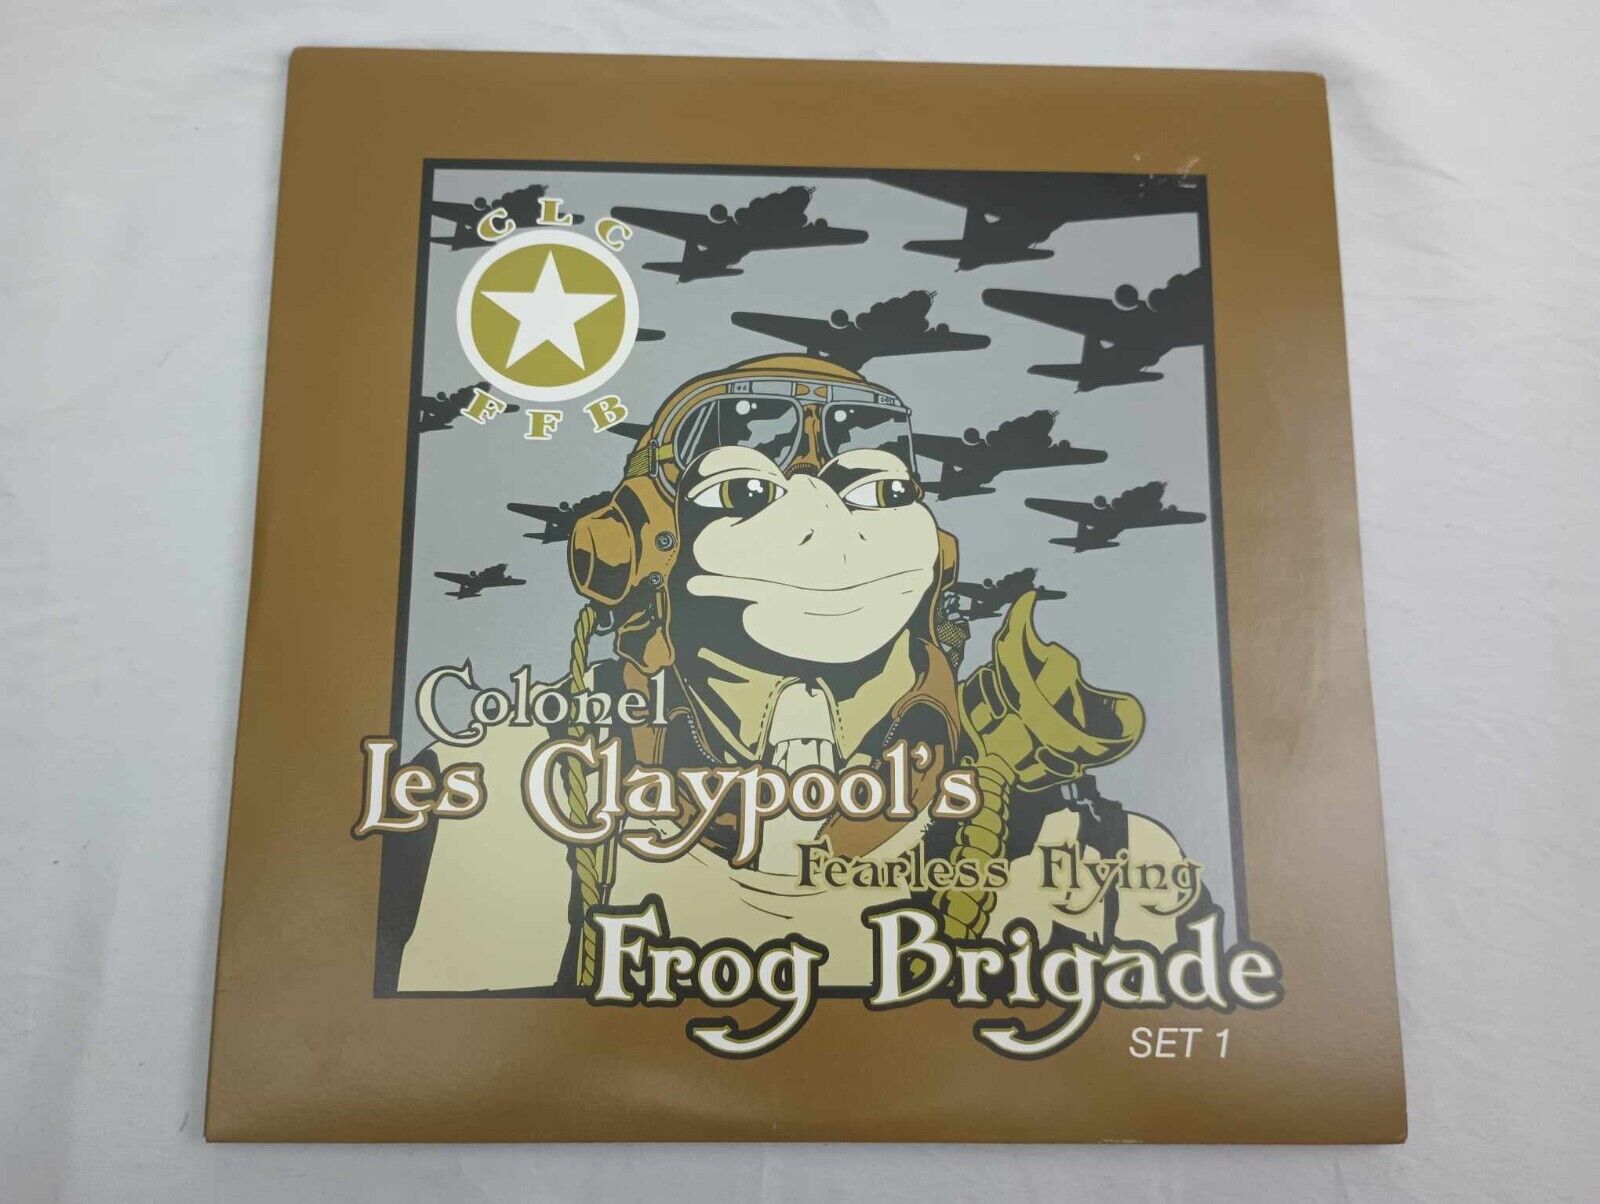 Les Claypool's Fearless Flying Frog Brigade Live Frogs Sets 1 & 2 Vinyl x3 green